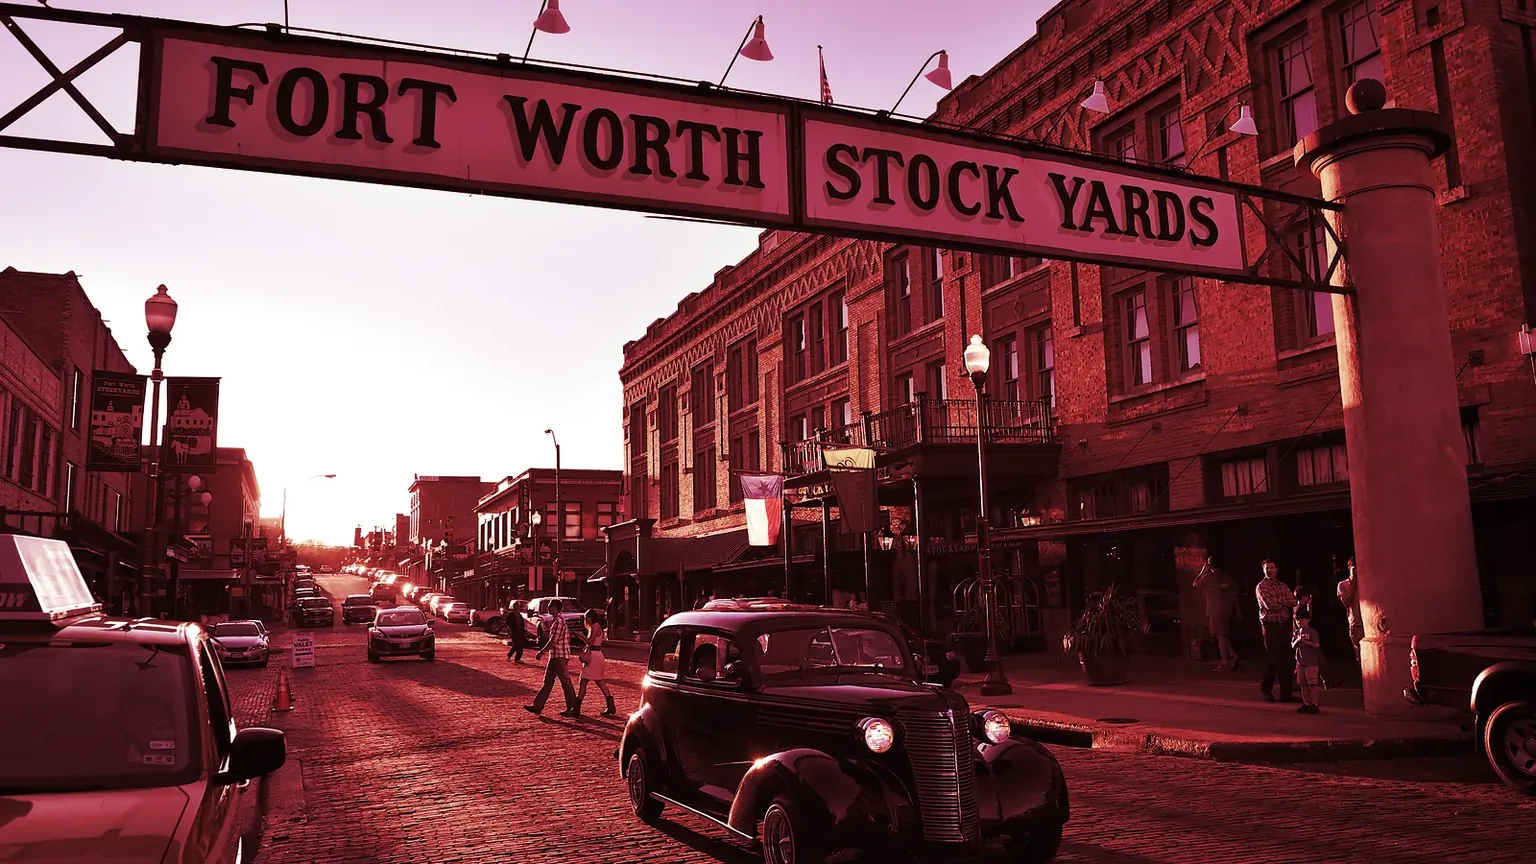 Fort Worth is the fifth-largest city in Texas. Image: Shutterstock.